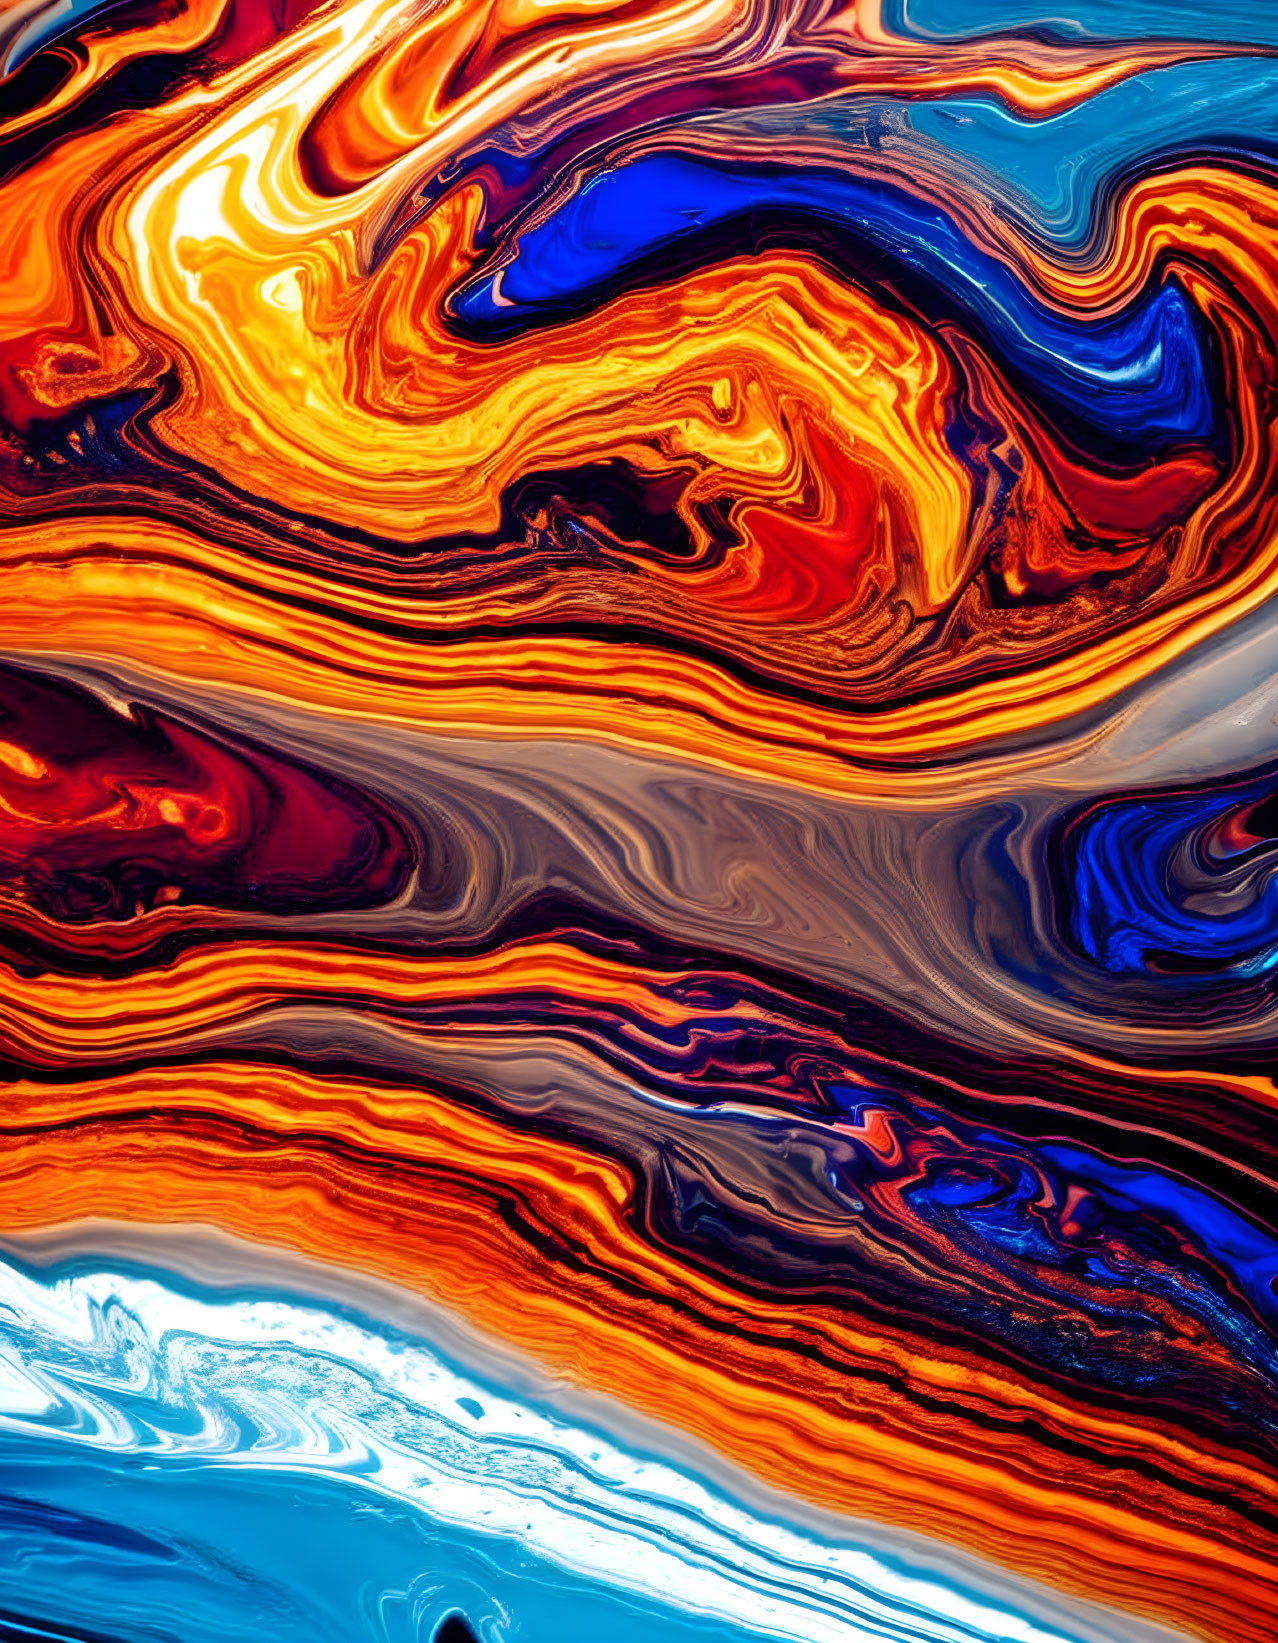 Colorful Abstract Swirling Pattern in Fiery Oranges and Deep Blues